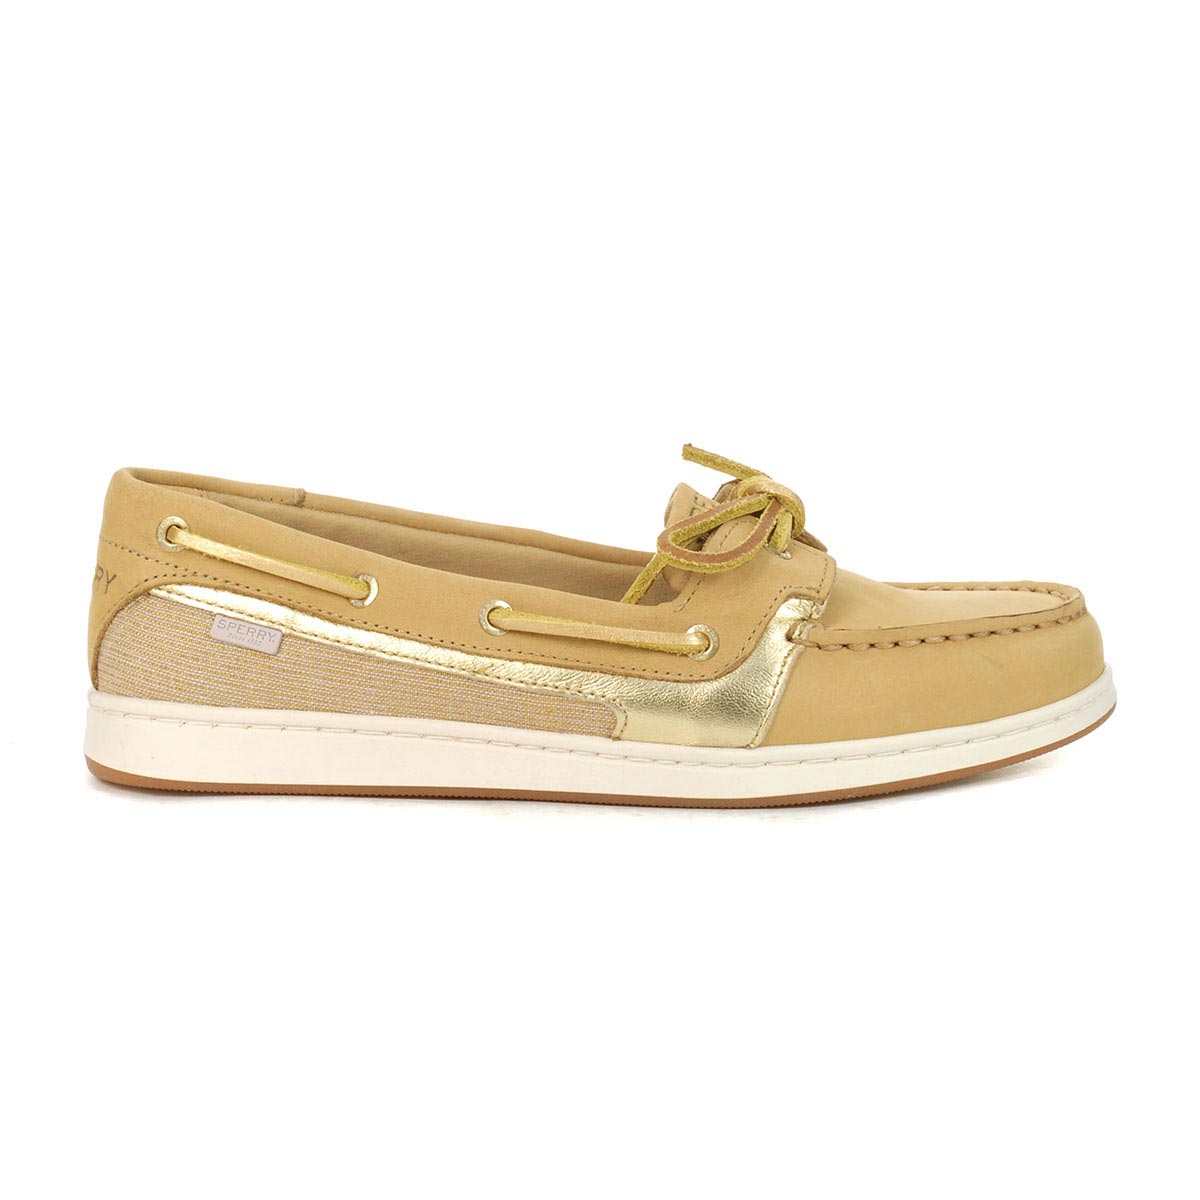 Sperry Women's Starfish Tan Boat Shoes